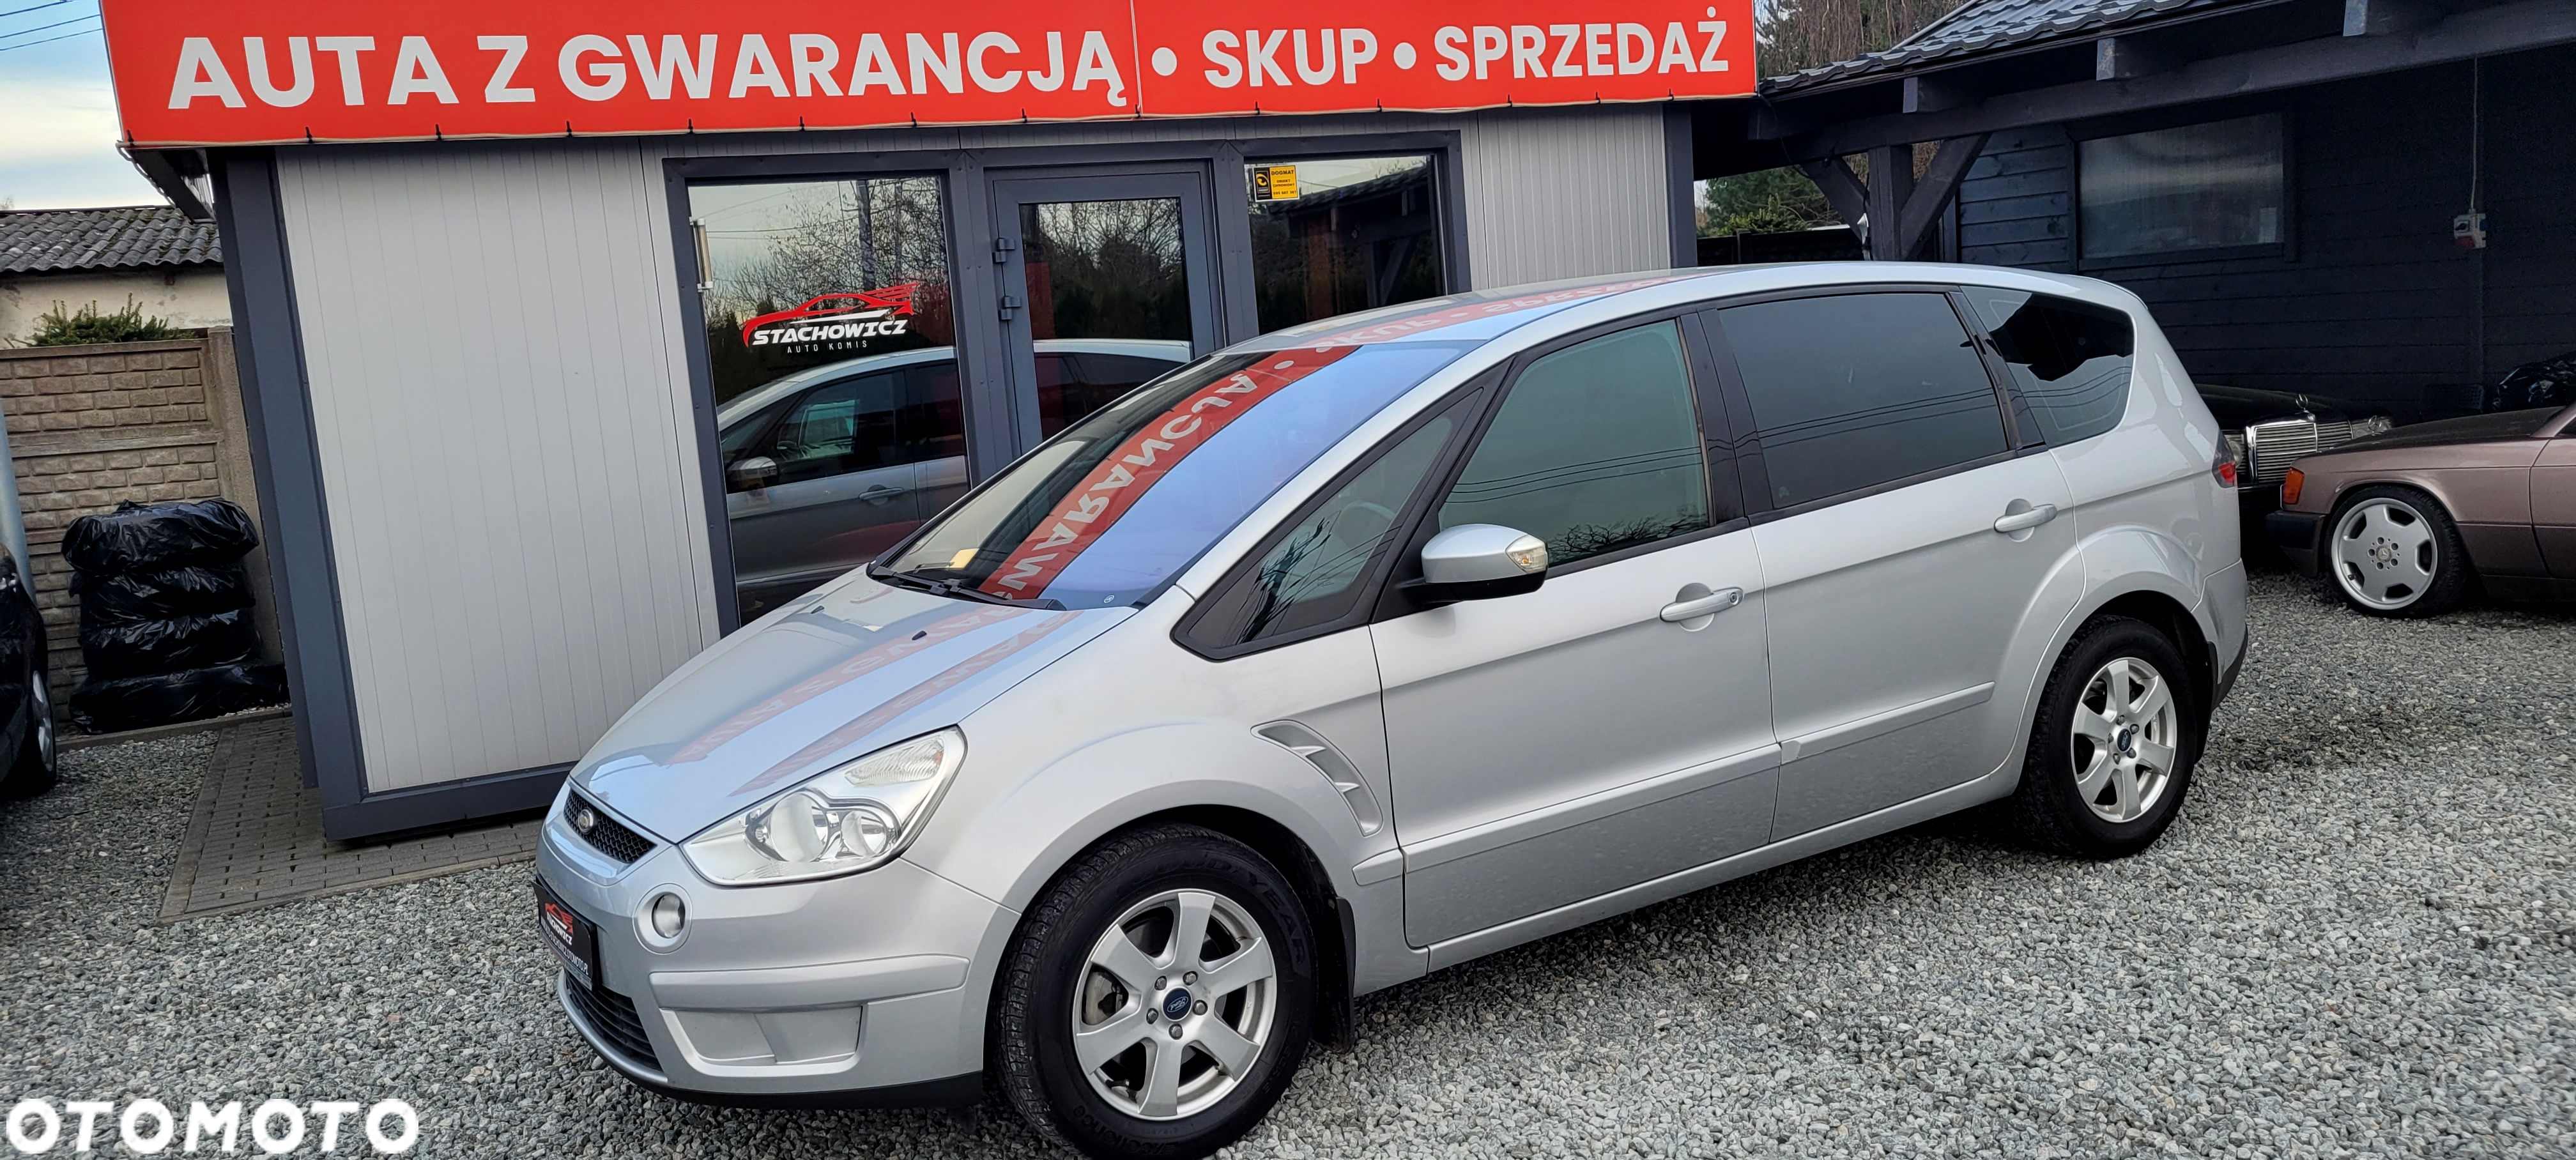 Ford S-Max 2.0 Ambiente - 2